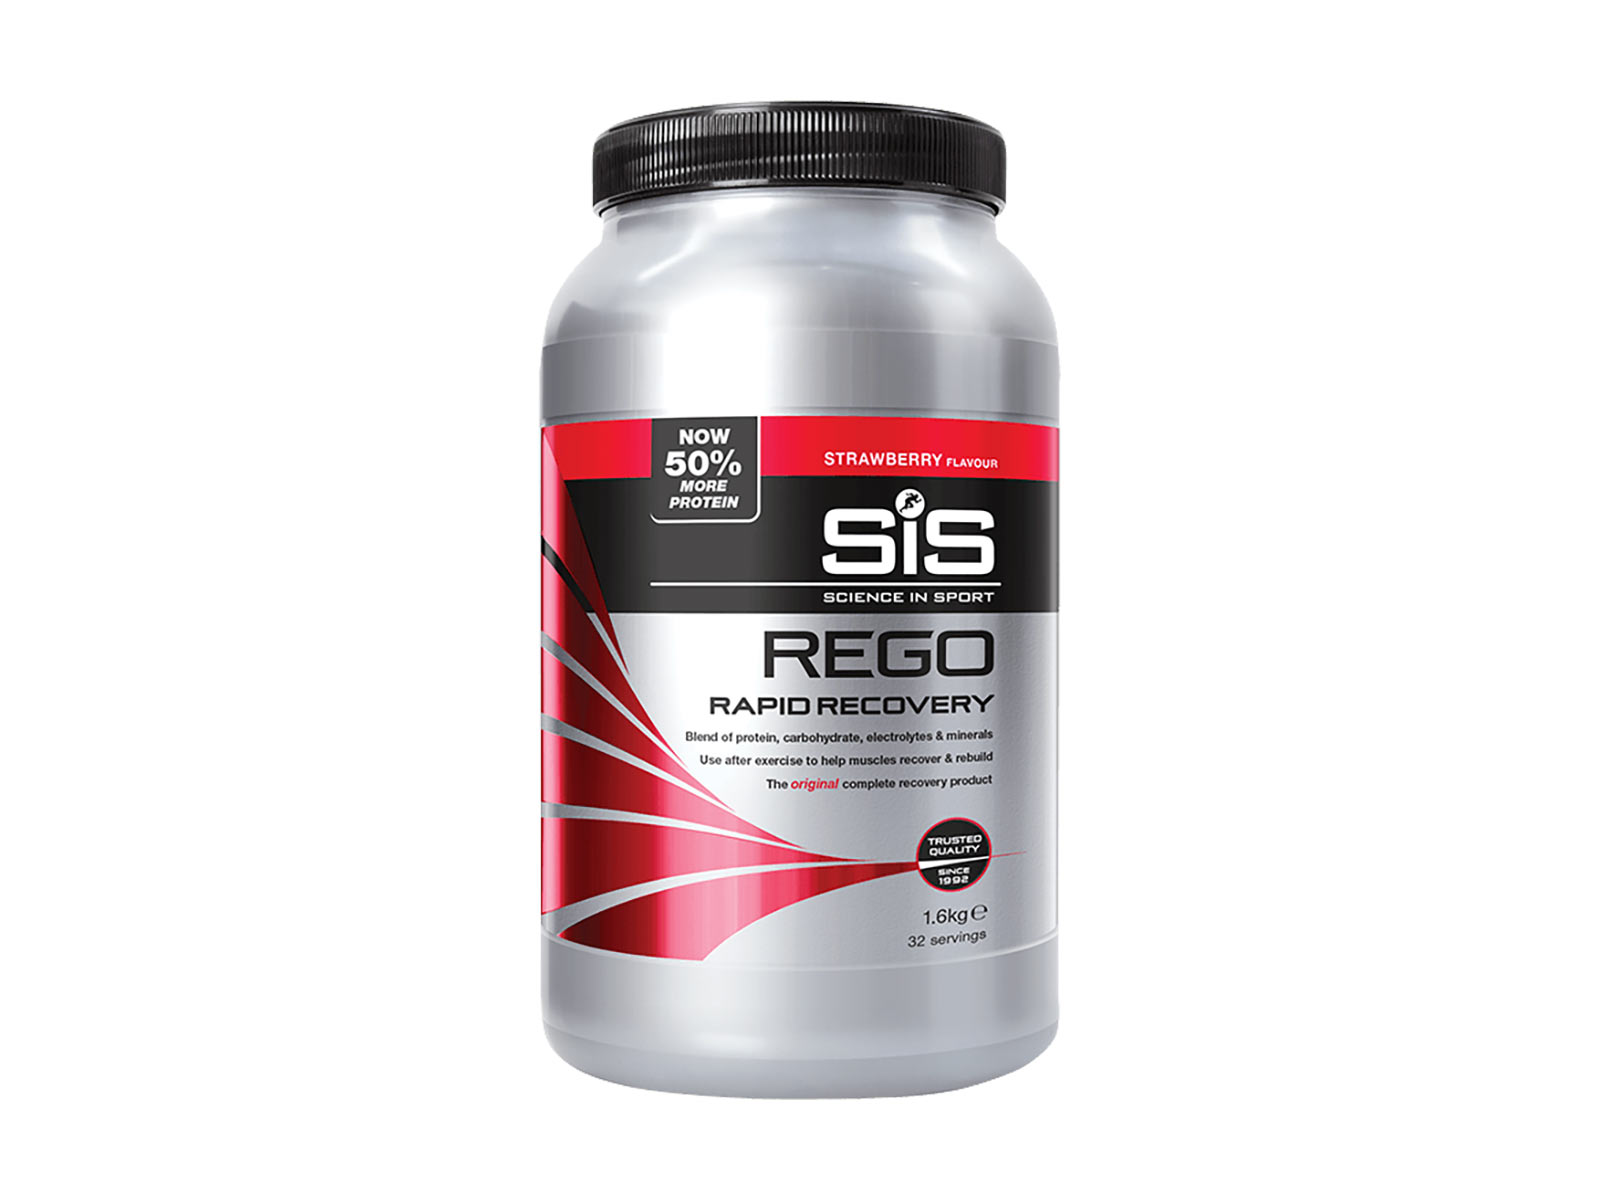 SiS REGO Rapid Recovery Powder 1.6kg